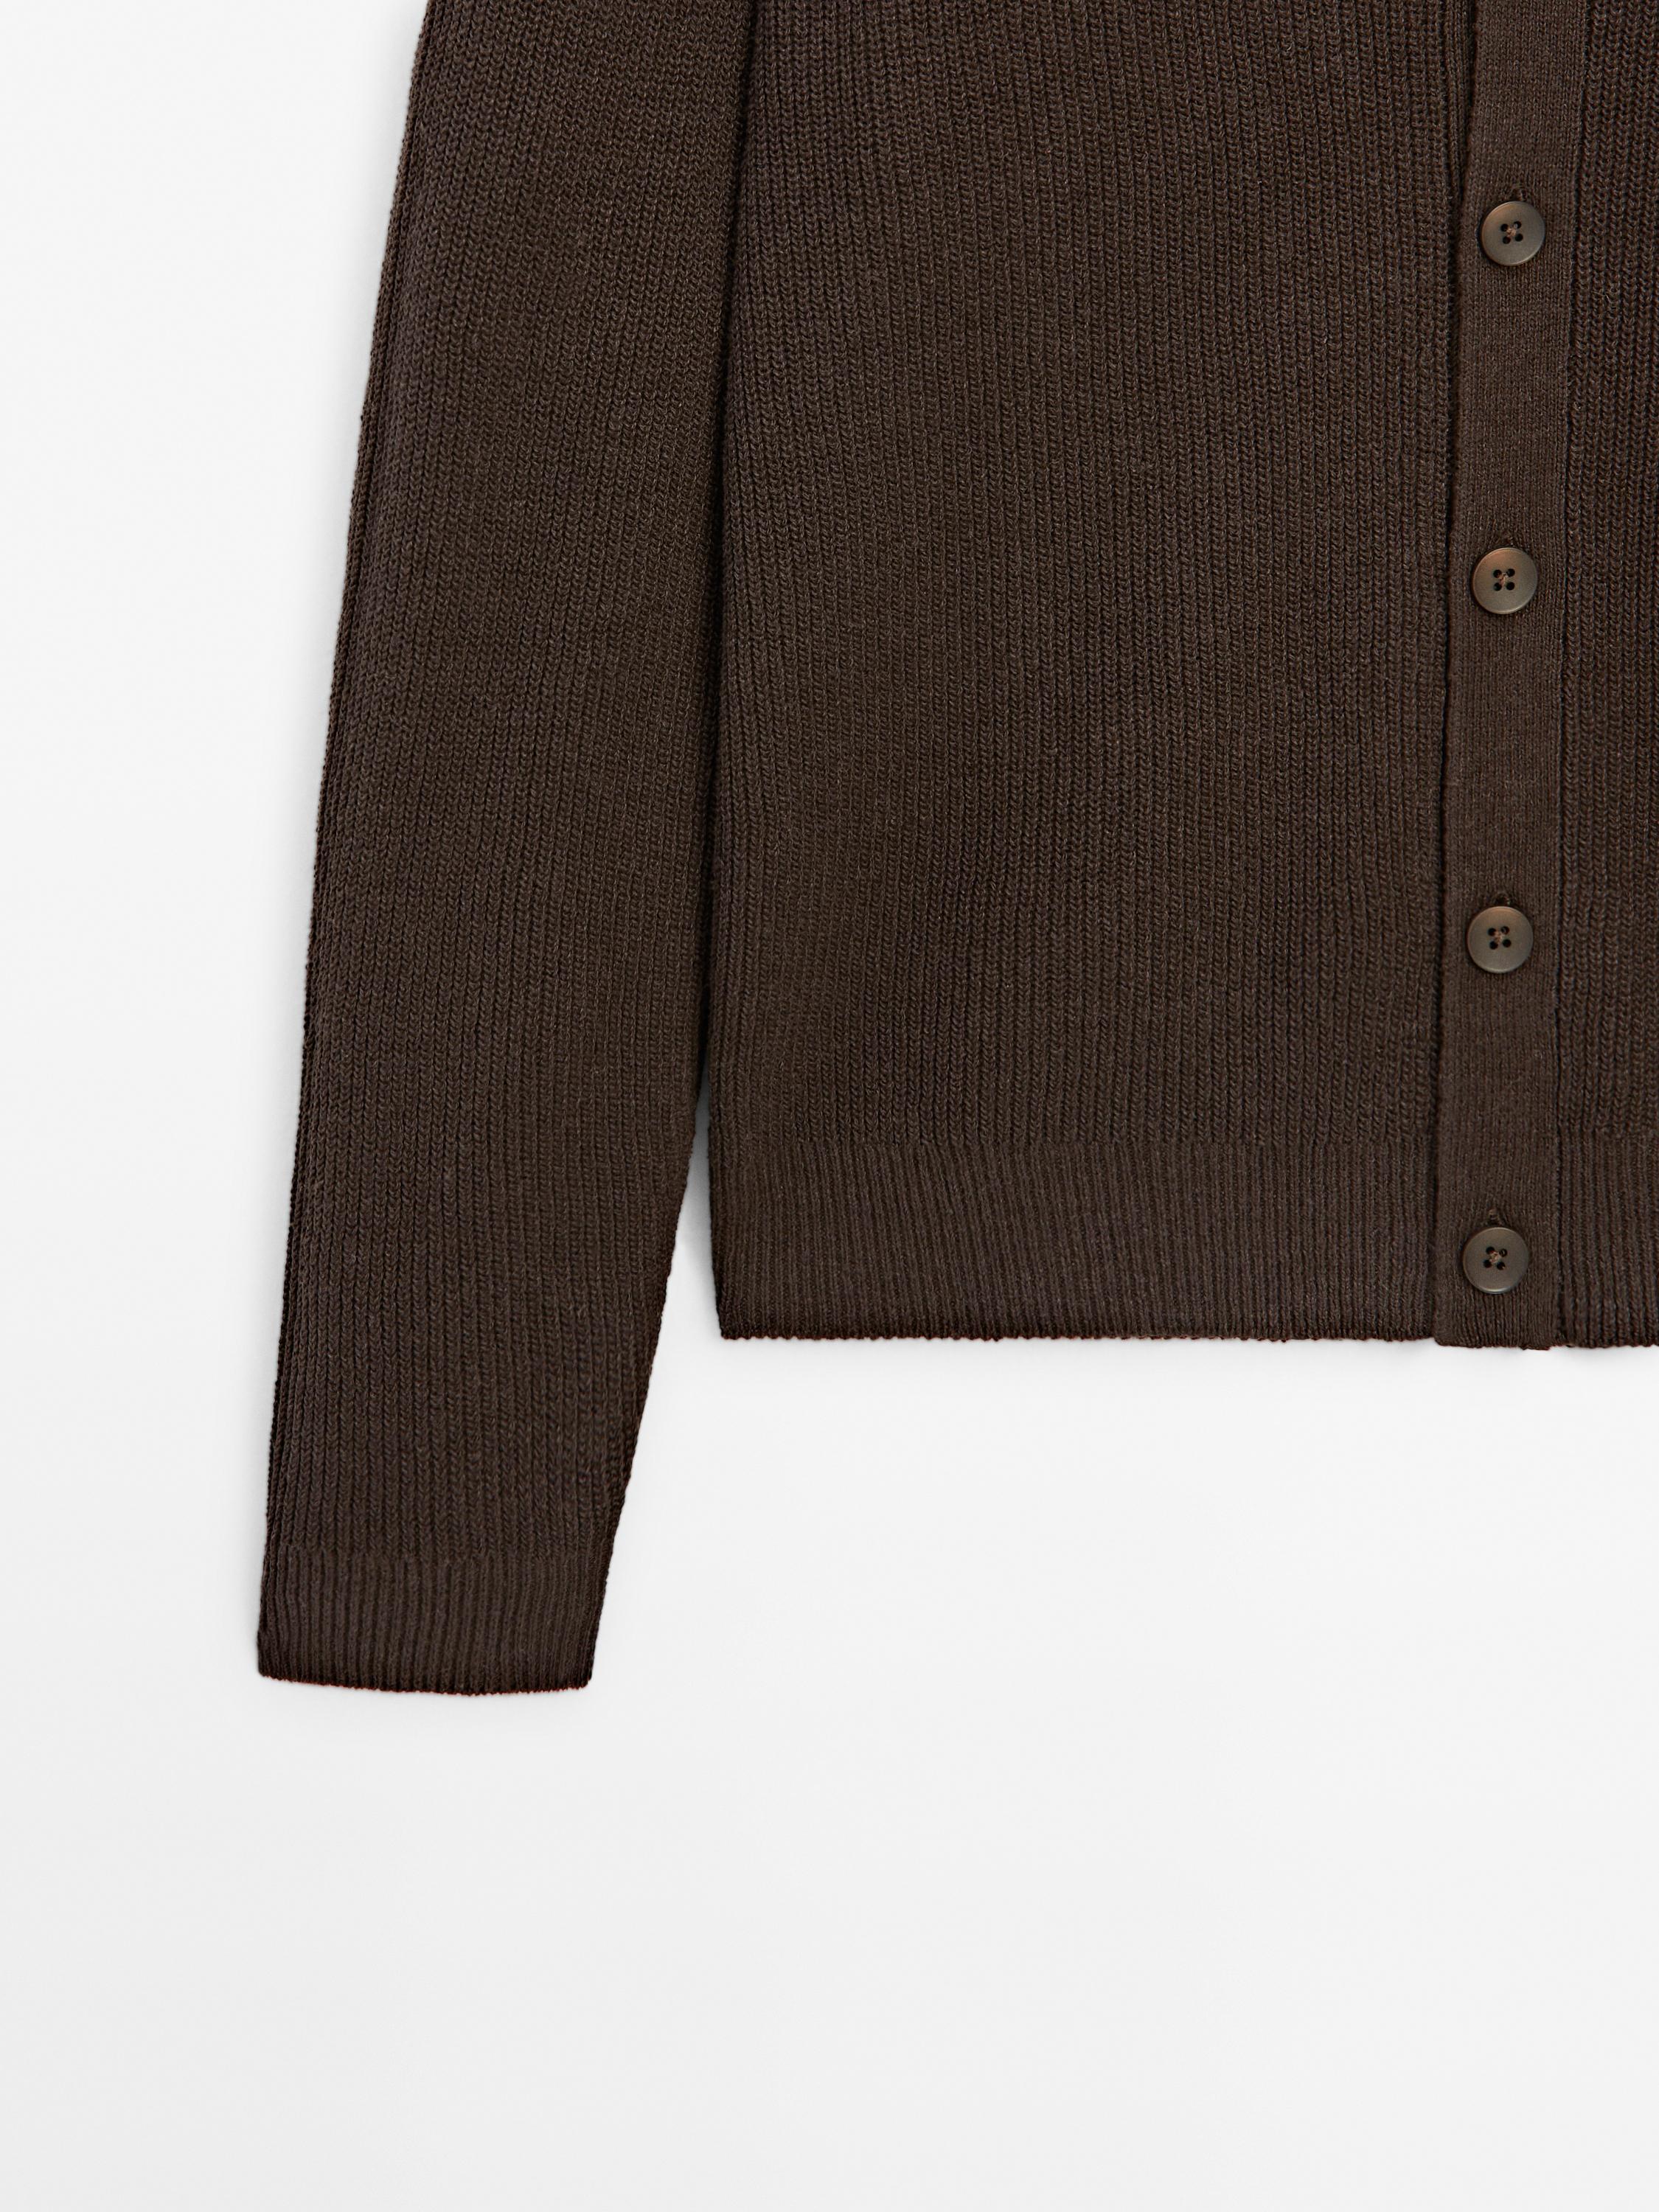 Knit cardigan with buttons - Limited Edition - Dark brown | ZARA 